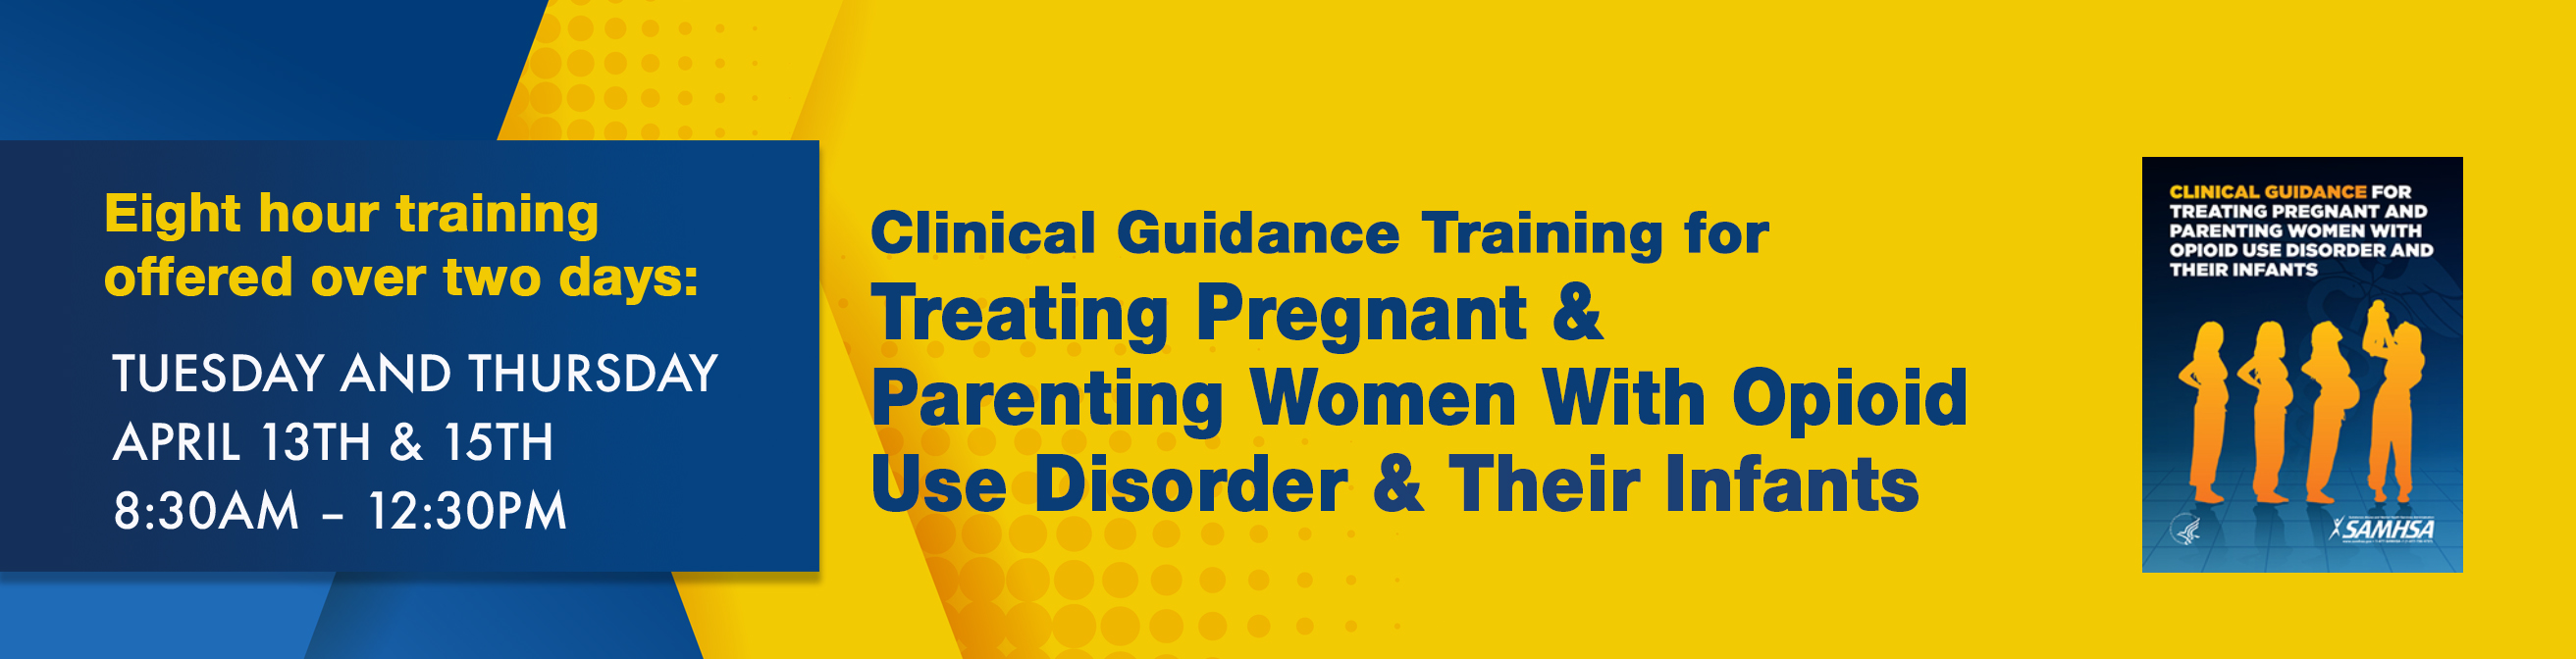 Clinical Guidance Training for Treating Pregnant & Post-Partum Women With Opioid Use Disorder & Their Infants